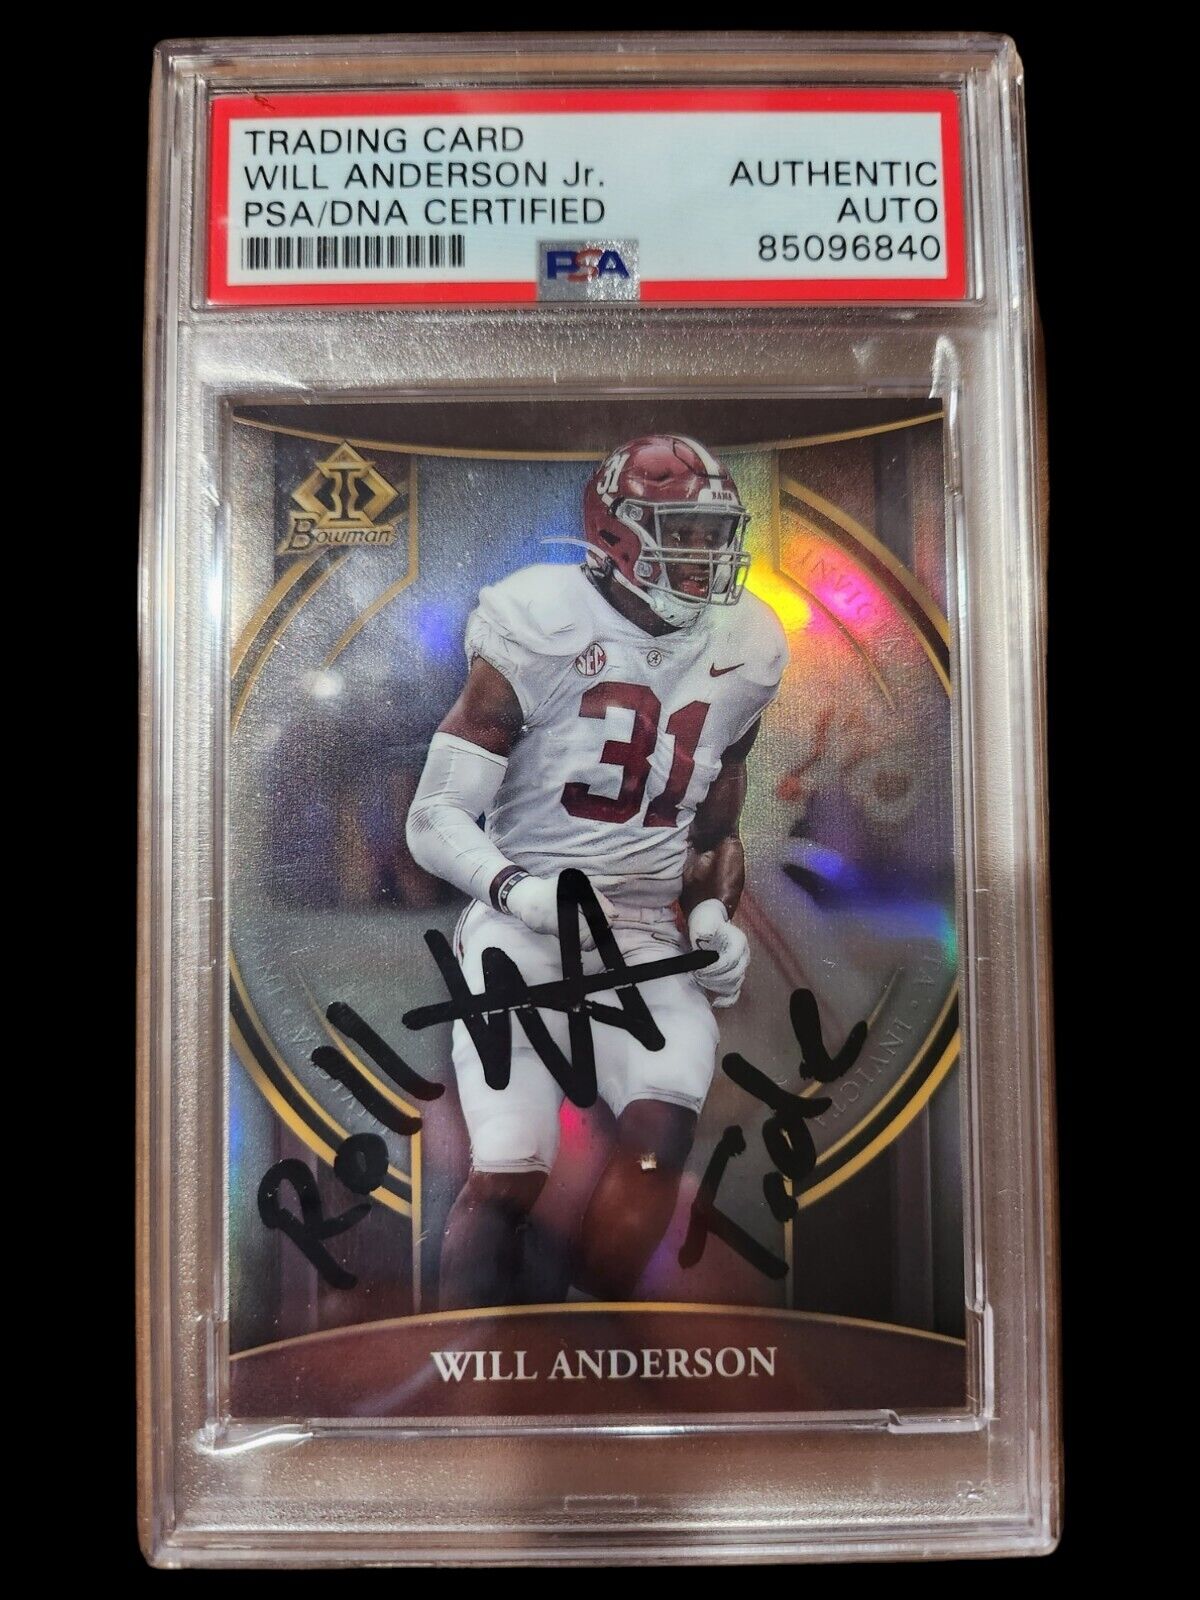 Signed Bowman University Will Anderson Alabama Invicta Rookie PSA Encapsulated